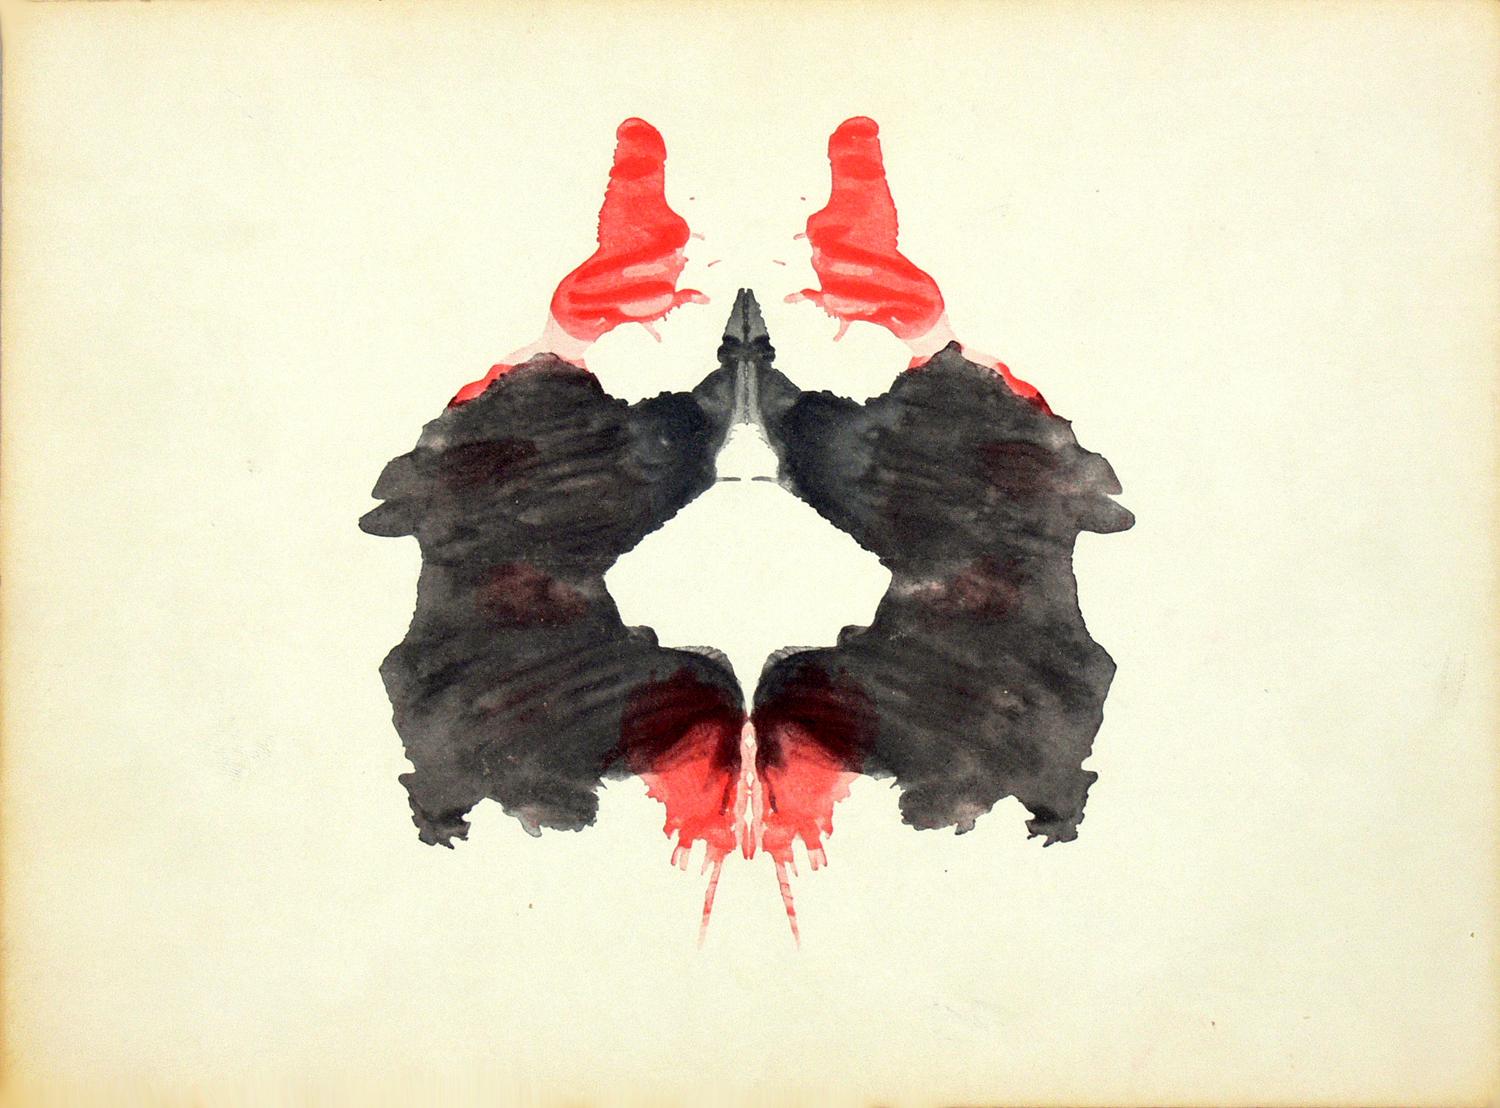 Group of original abstract Rorschach inkblot test prints, circa 1950s. Framed in clean lined black gallery frames. Originally created in 1921 by Hermann Rorschach for psychodiagnostics, these framed works have a wonderful abstract feel and are a